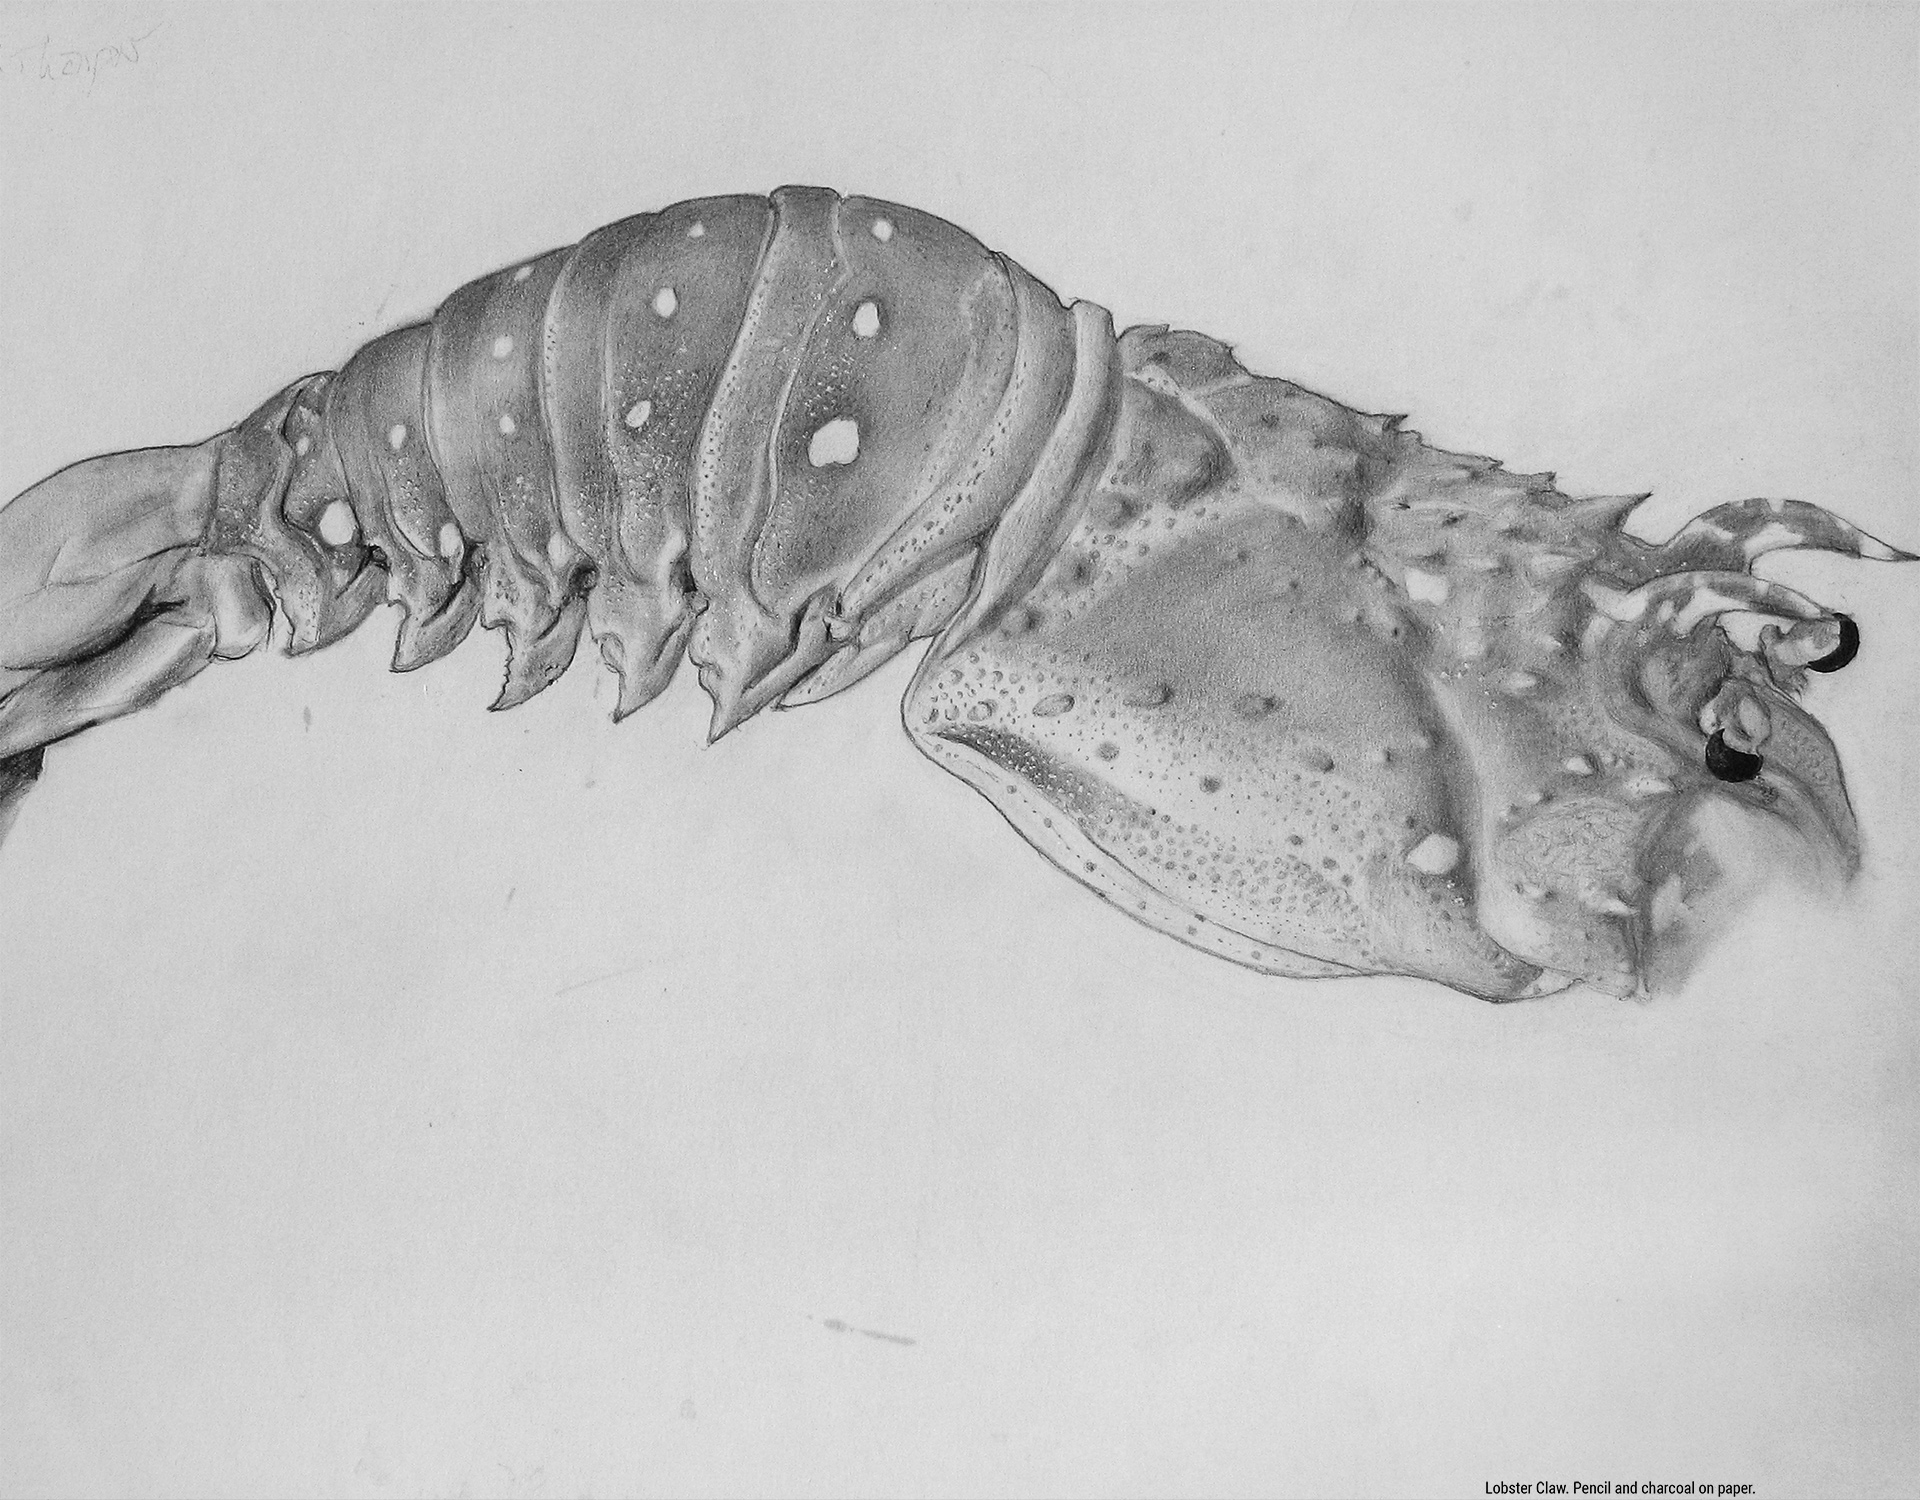 Lobster Claw. Pencil and charcoal on paper.